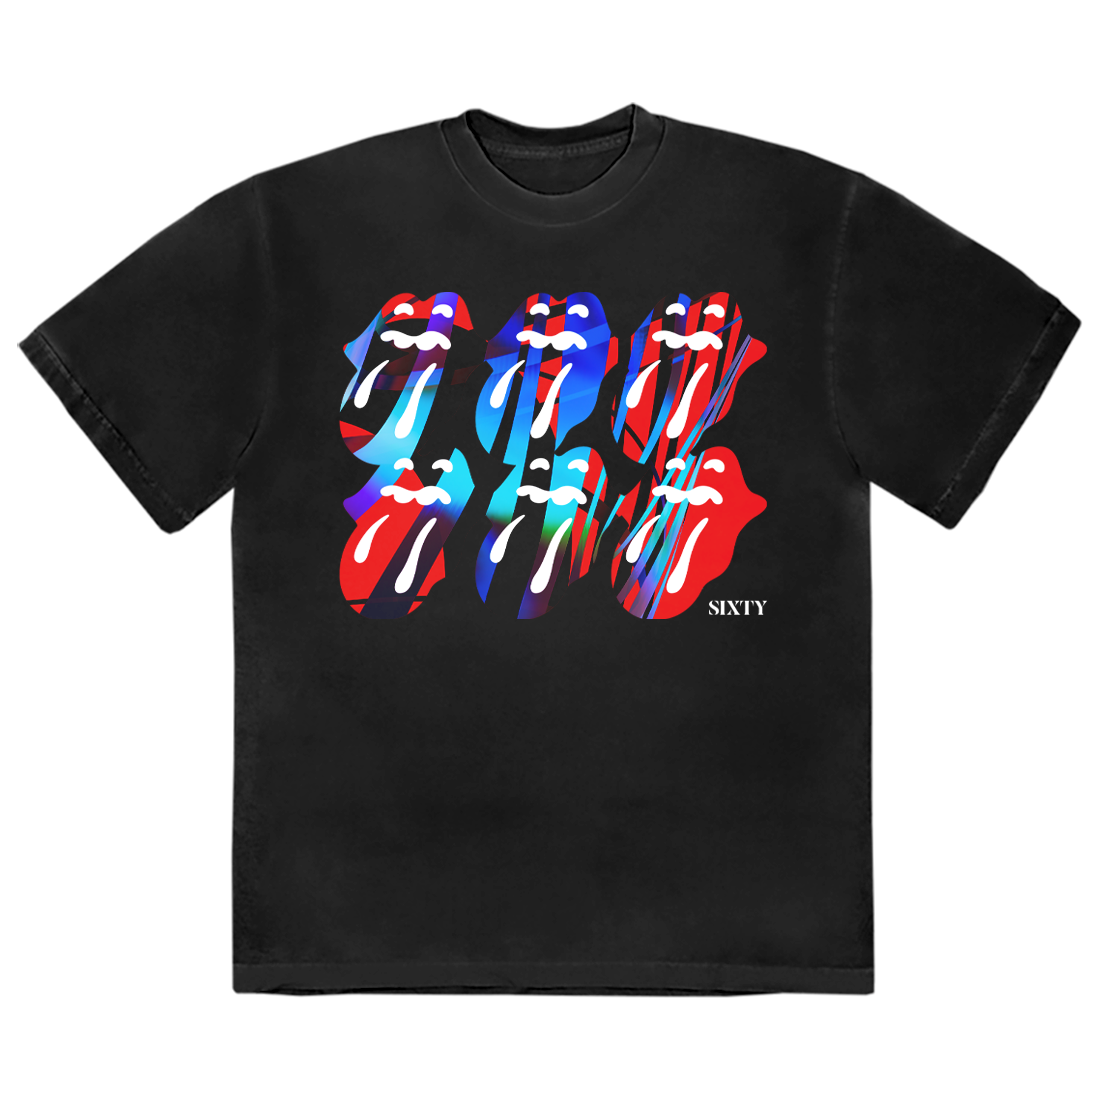 Sixty Tongue Black T-Shirt - The Rolling Stones